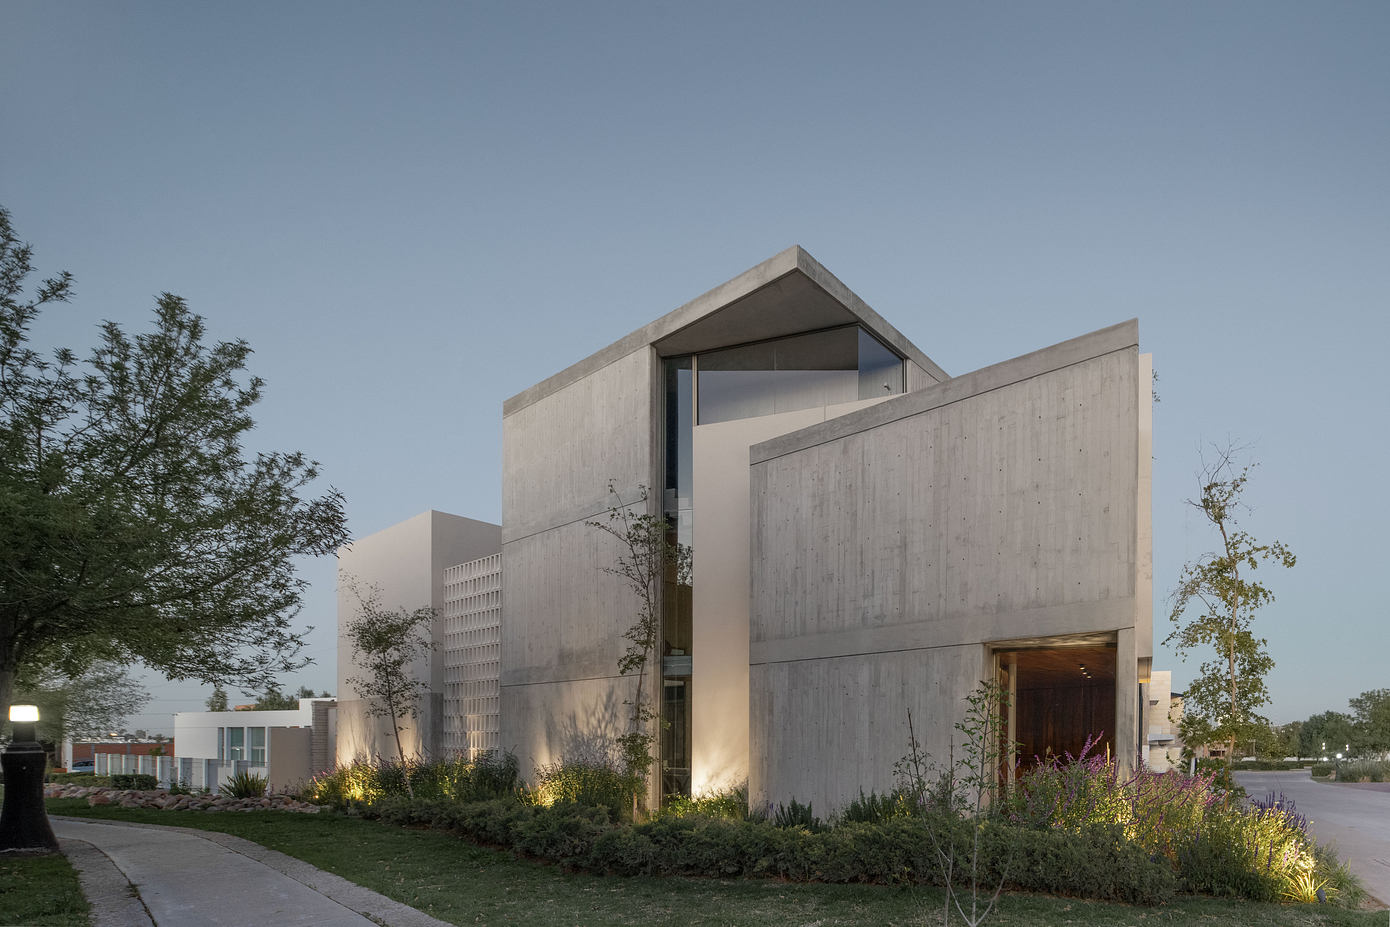 Sama House: A Stunning Blend of Concrete, Wood, and Nature